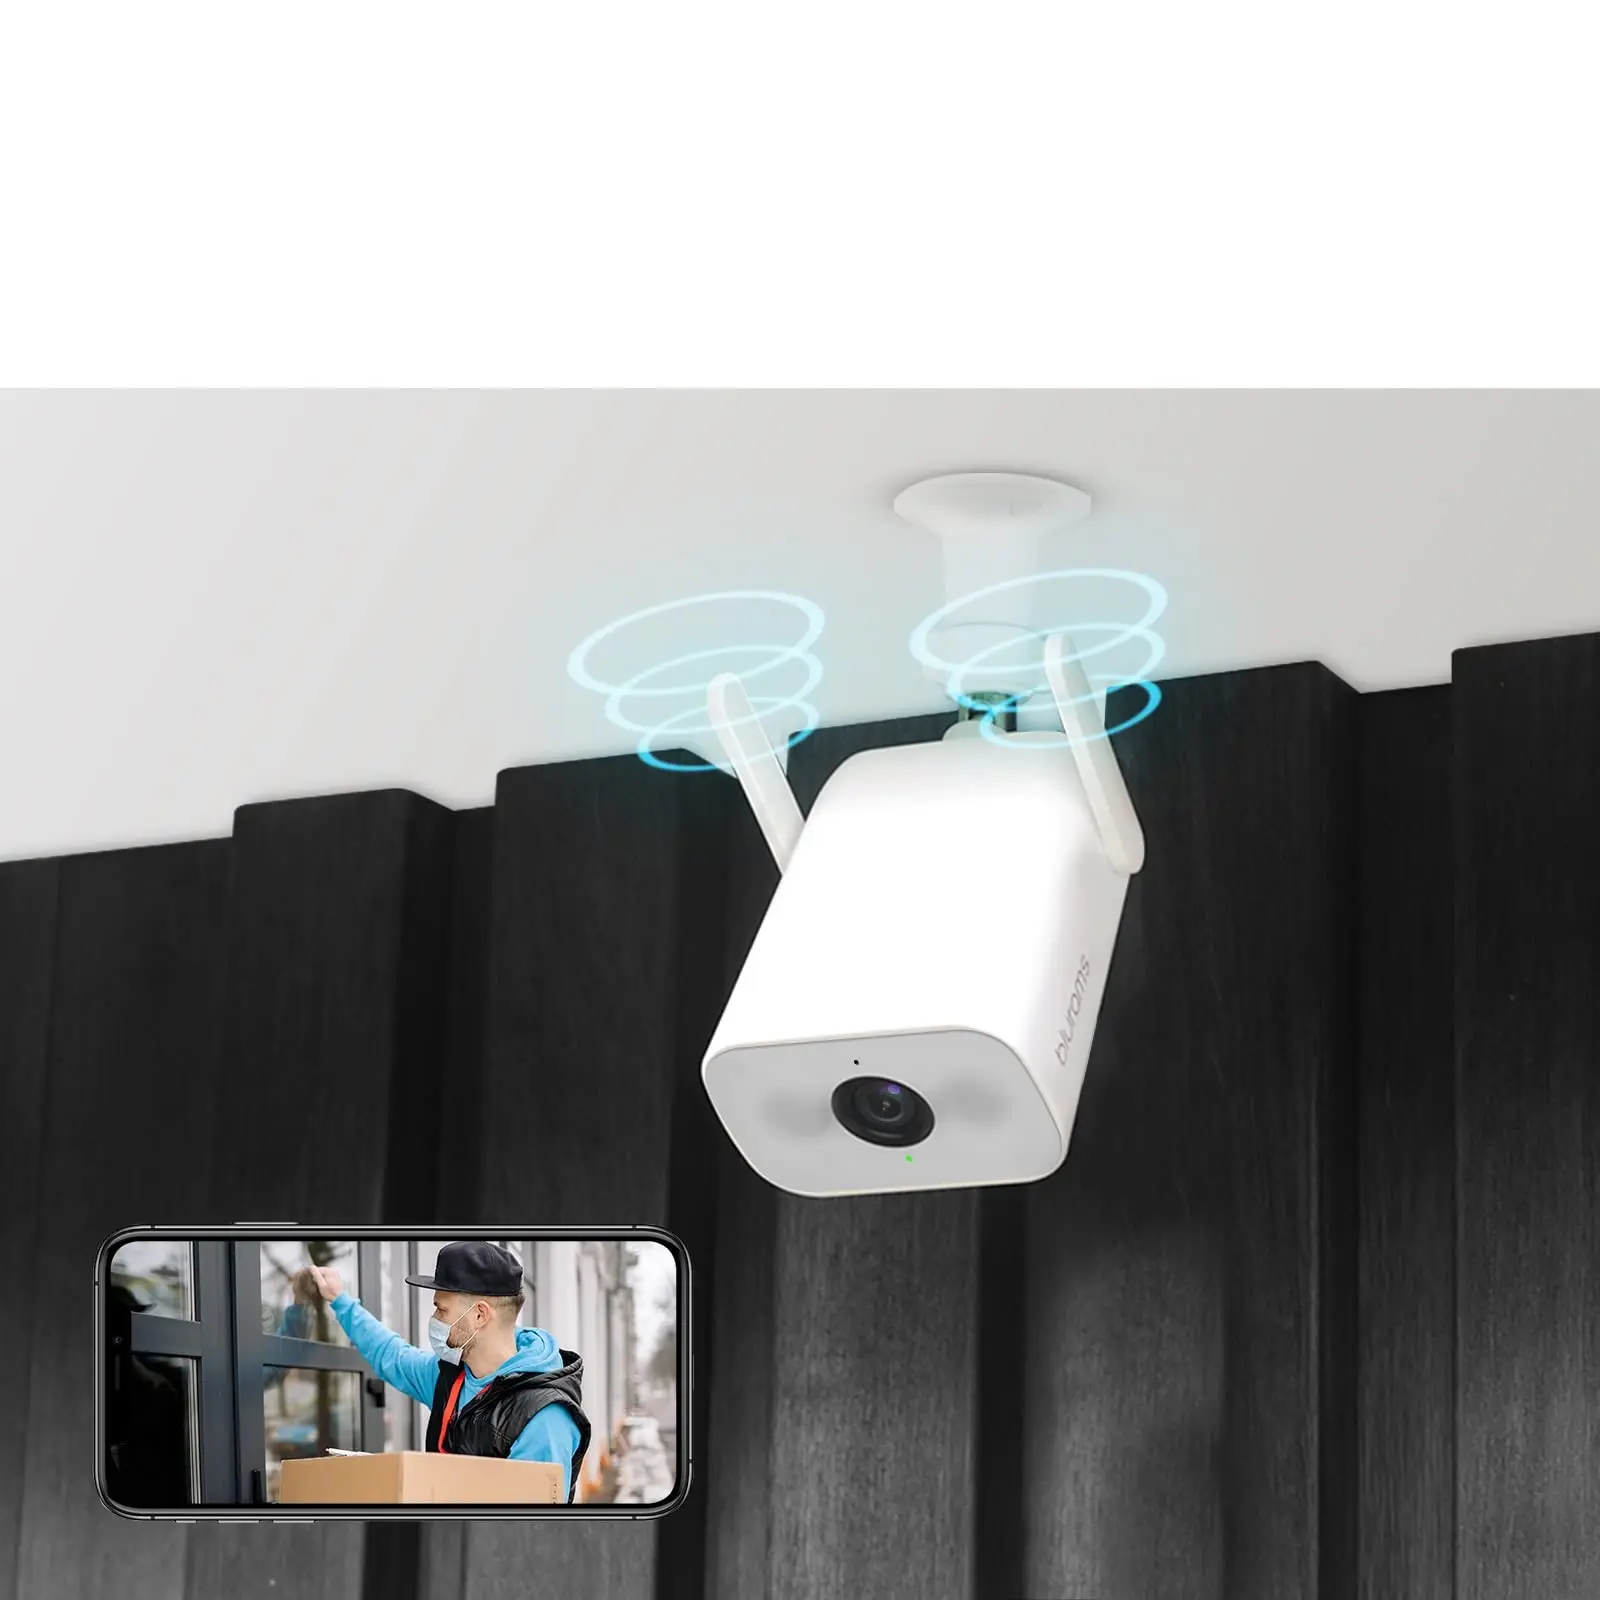 Home Night Vision IP66 Camera Waterproof Motion Detection Spotlight WiFi Surveillance Outdoor Camera with SD Card&Cloud Storage